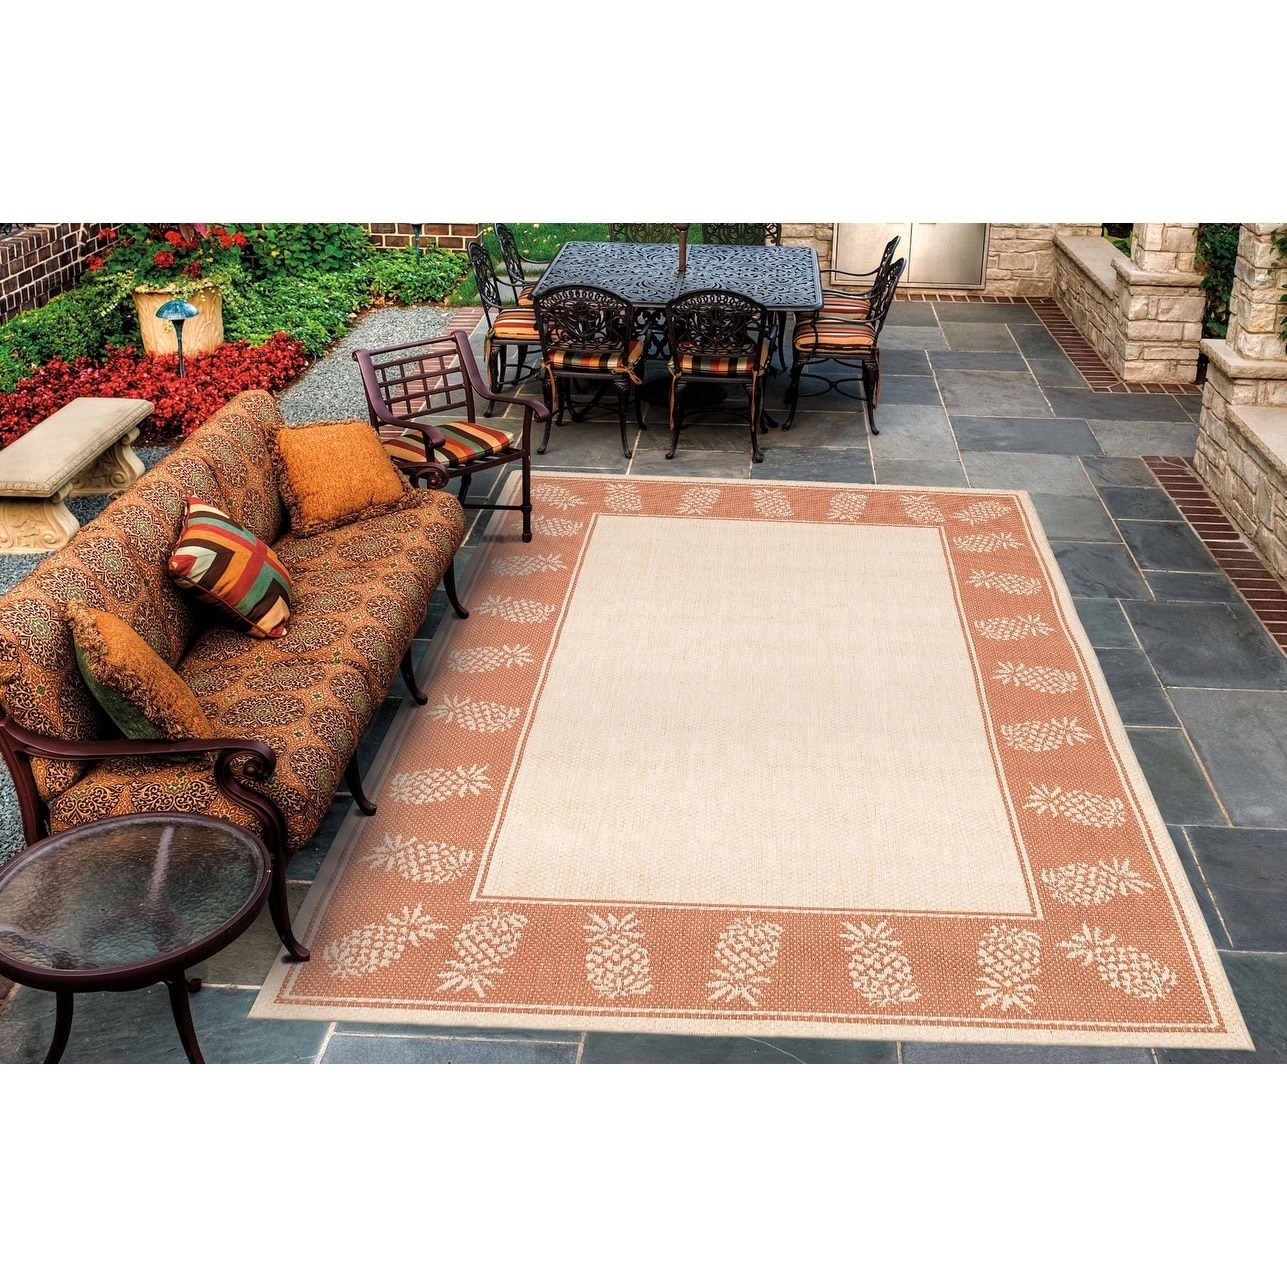 Recife Tropics/ Natural Terra cotta Area Rug (86 X 13) (NaturalSecondary colors Terra CottaTip We recommend the use of a non skid pad to keep the rug in place on smooth surfaces.All rug sizes are approximate. Due to the difference of monitor colors, som